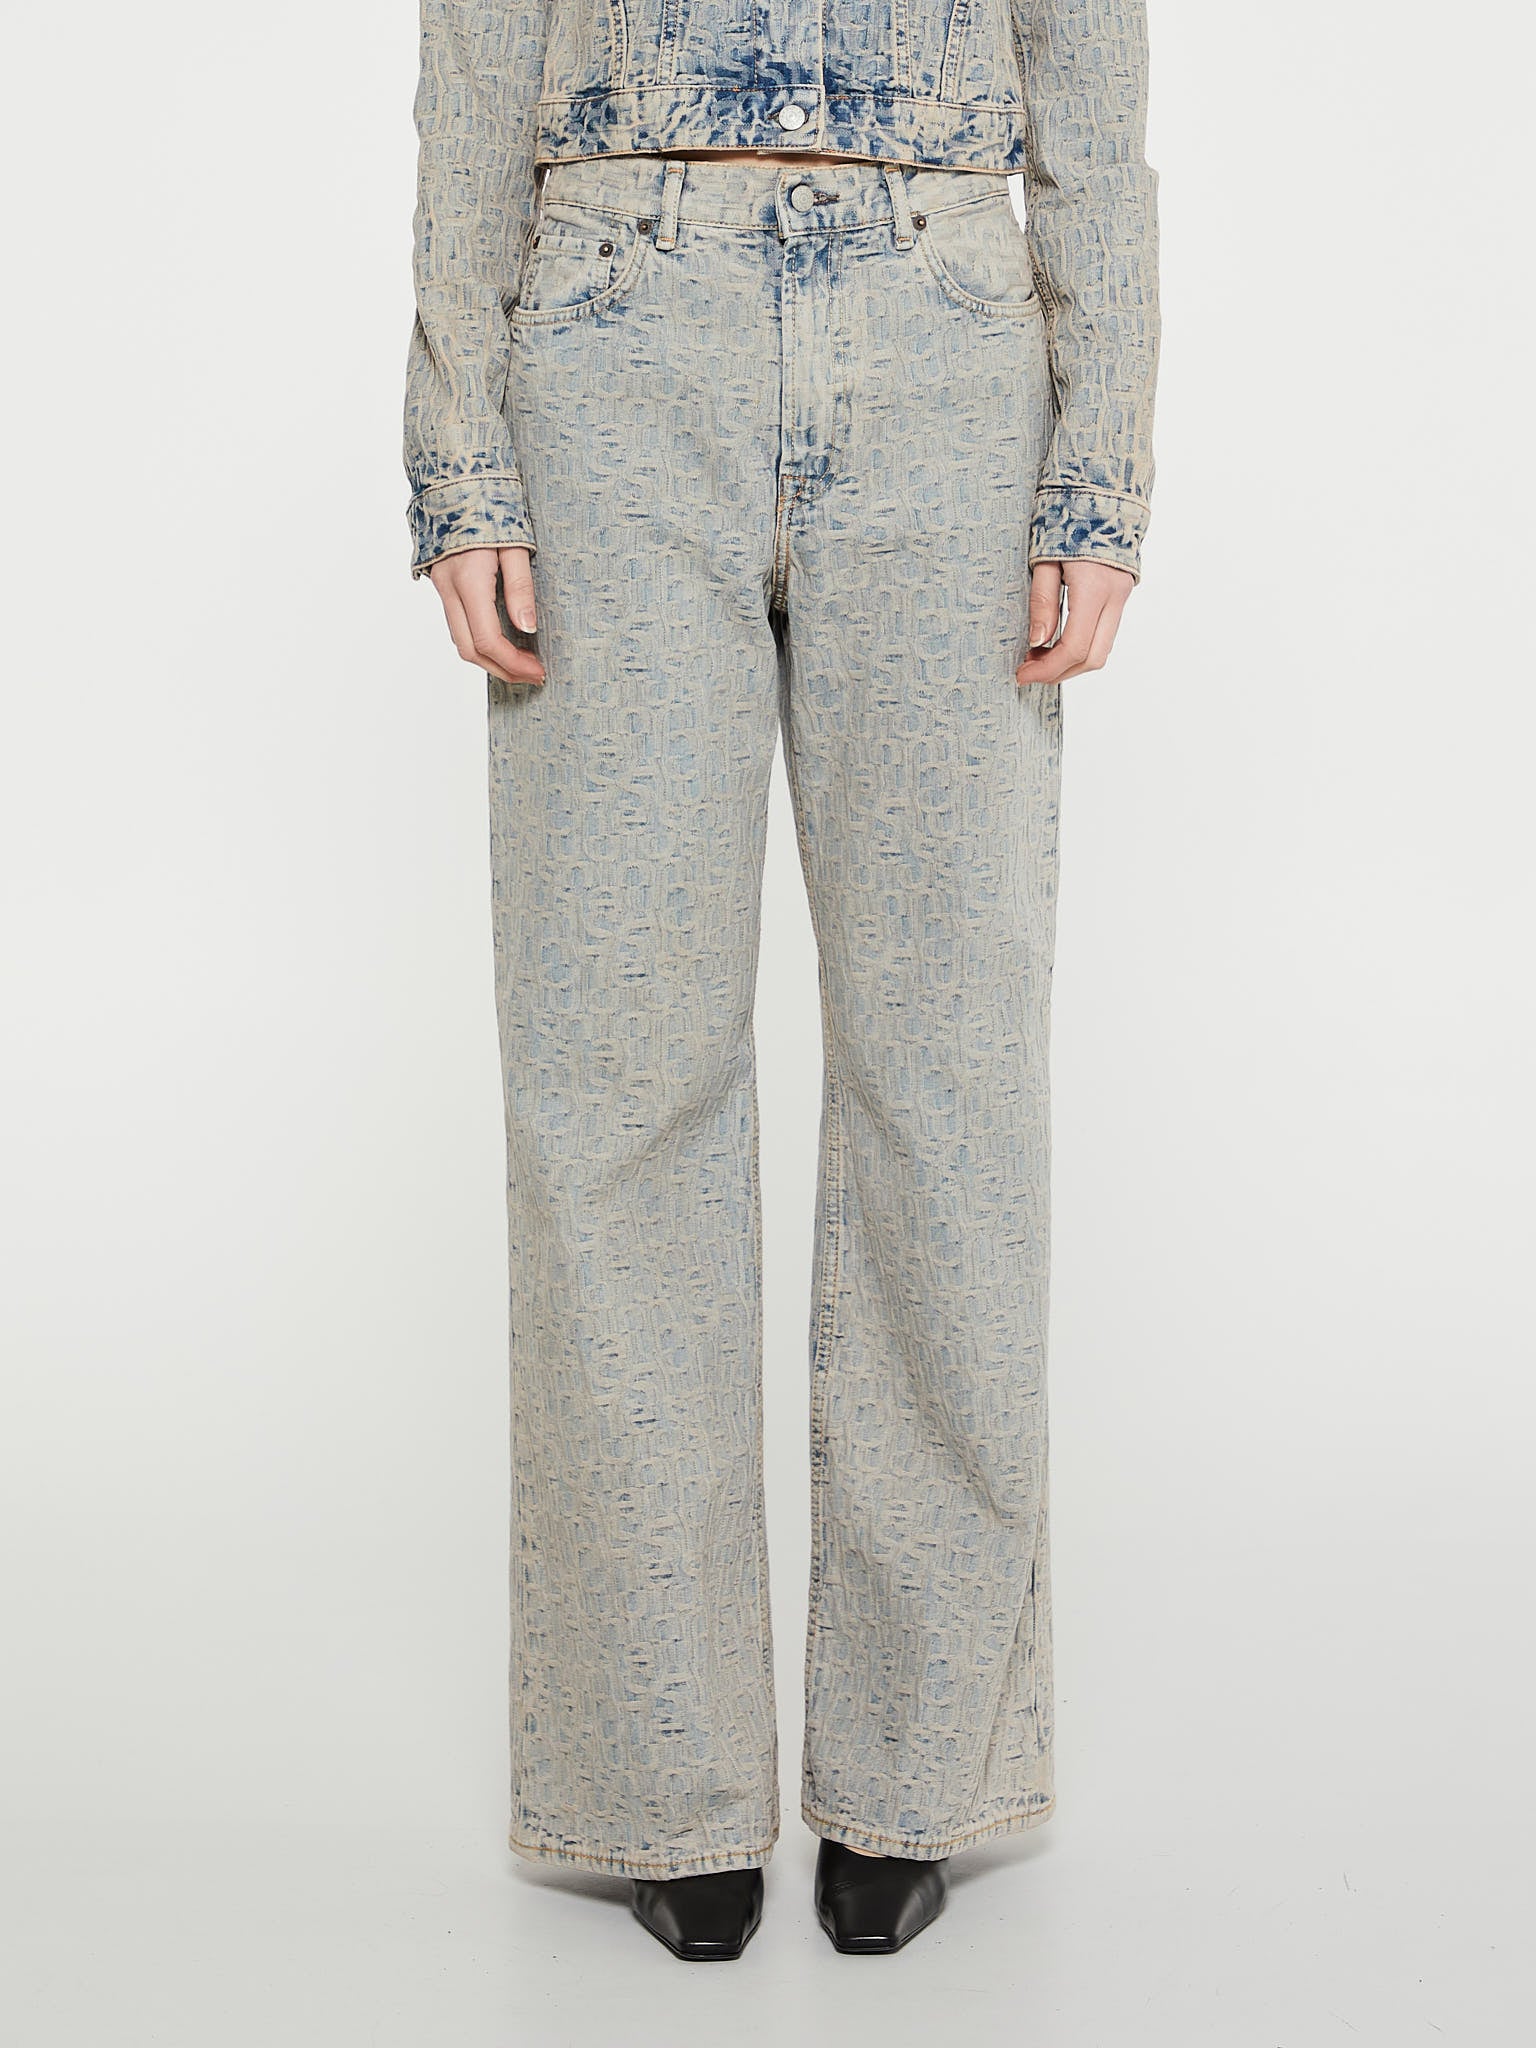 Acne Studios - 2022 Relaxed Fit Monogram Jeans in Blue and Beige